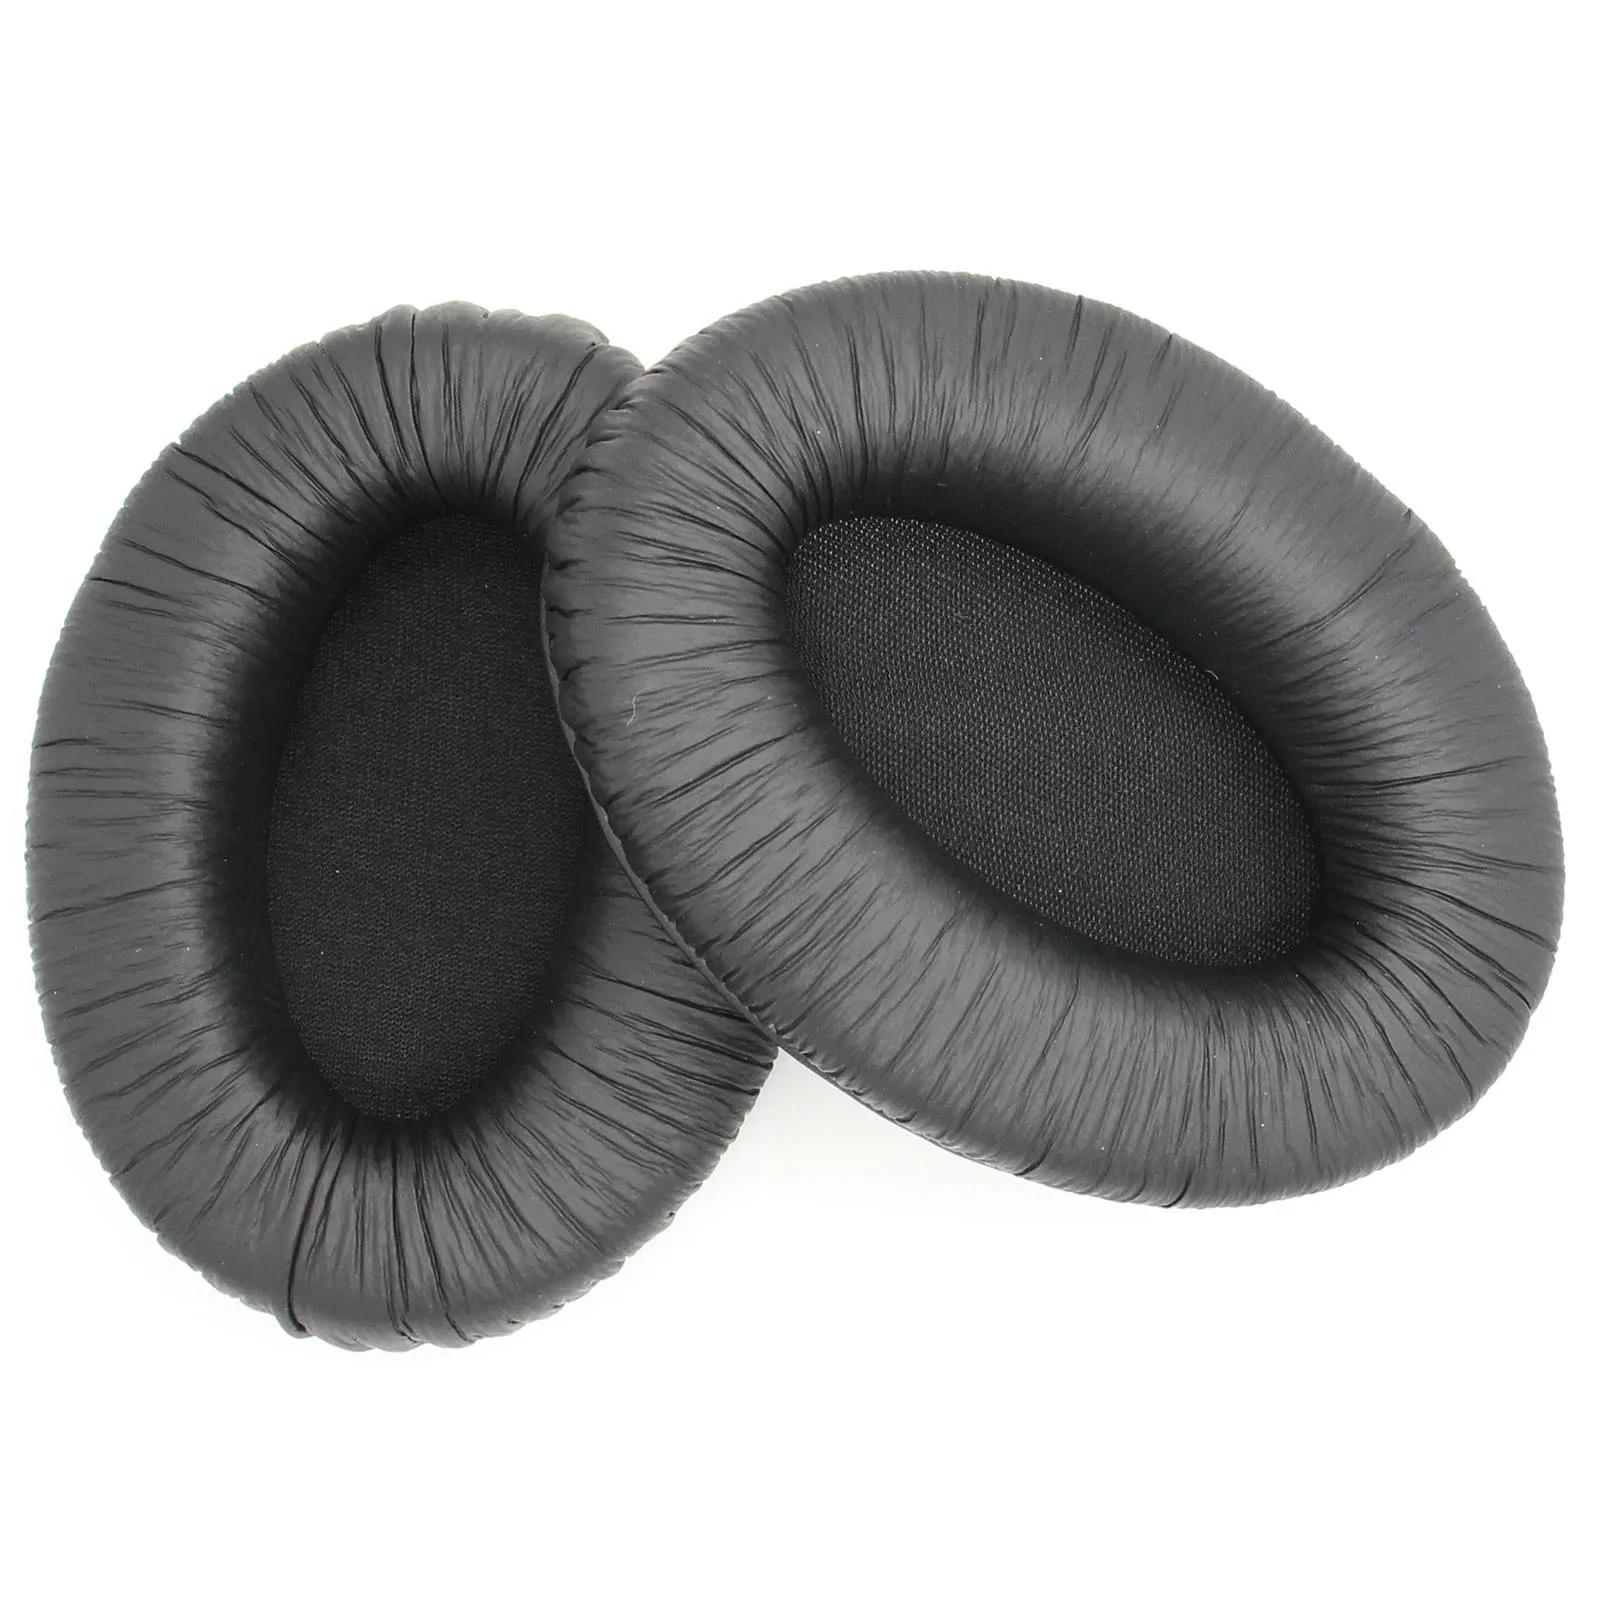 Replacement Earpads Cushion Cover for Sennheiser HD280 HD 280 Pro Headphones 